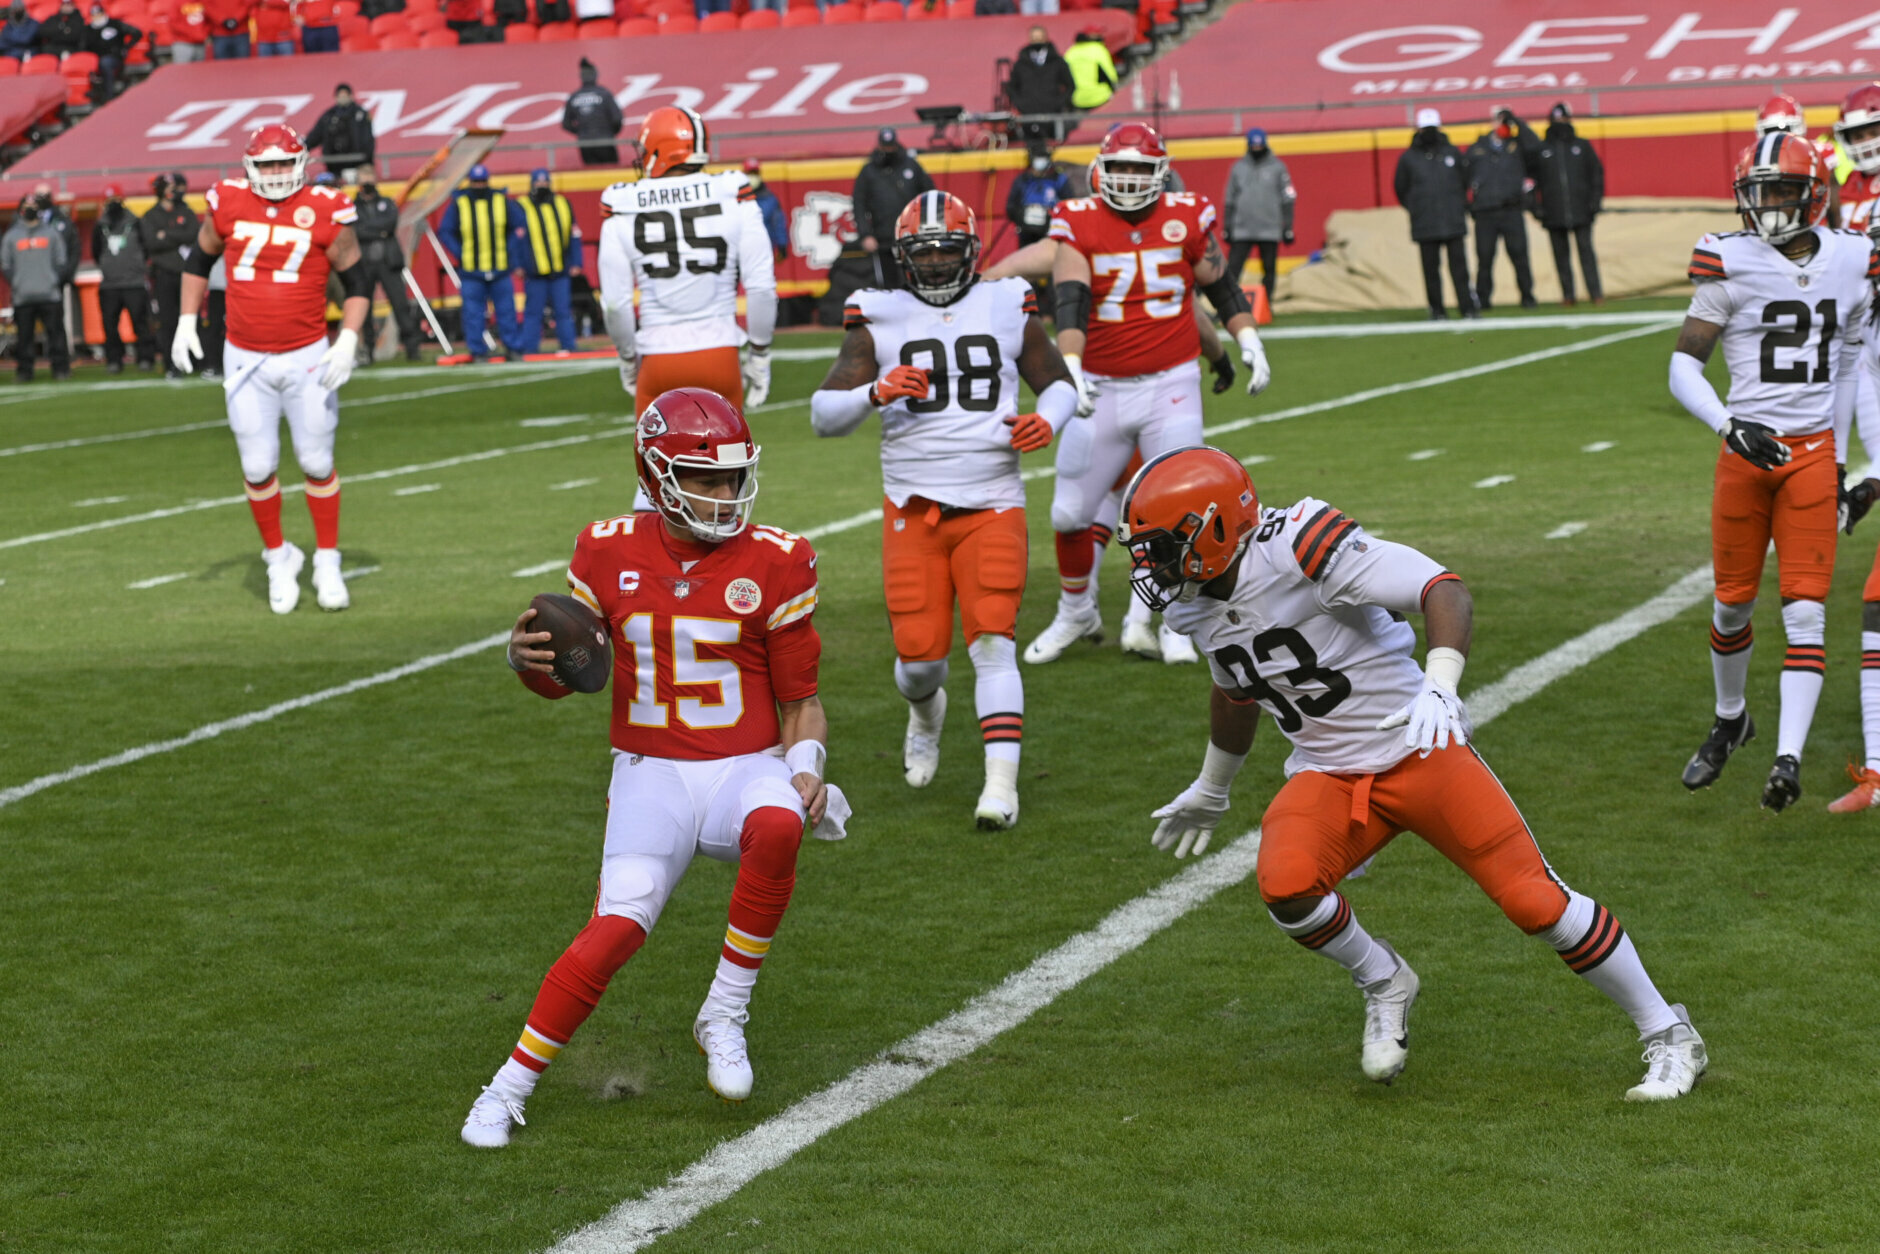 <p><b><i>Browns 17</i></b><br />
<b><i>Chiefs 22</i></b></p>
<p>Maybe <a href="https://www.cleveland.com/browns/2021/01/should-browns-is-the-browns-become-the-new-team-slogan-poll.html" target="_blank" rel="noopener">the Browns is the Browns</a> after all.</p>
<p>Cleveland gave the defending champs a worthy fight but ultimately fell short because of <a href="https://twitter.com/RobWoodfork/status/1350917082070790145?s=20" target="_blank" rel="noopener">the worst rule in football</a> that looms large in <a href="https://twitter.com/ESPNStatsInfo/status/1350946007400525824?s=20" target="_blank" rel="noopener">eerily similar fashion to the game known simply as &#8220;The Fumble.&#8221;</a> In this case, however, the Browns seem less like a snakebit team and more like an annual contender that will eventually break through to their first Super Bowl.</p>
<p>Kansas City&#8217;s victory was a pyrrhic one indeed — Patrick Mahomes is the single greatest asset in the sport, yet Andy Reid&#8217;s insistence on literally running him into the ground on a third-and-short situation rather than giving it to an actual running back is baffling. It&#8217;s a decision that just might cost the Chiefs a return trip to the Super Bowl.</p>
